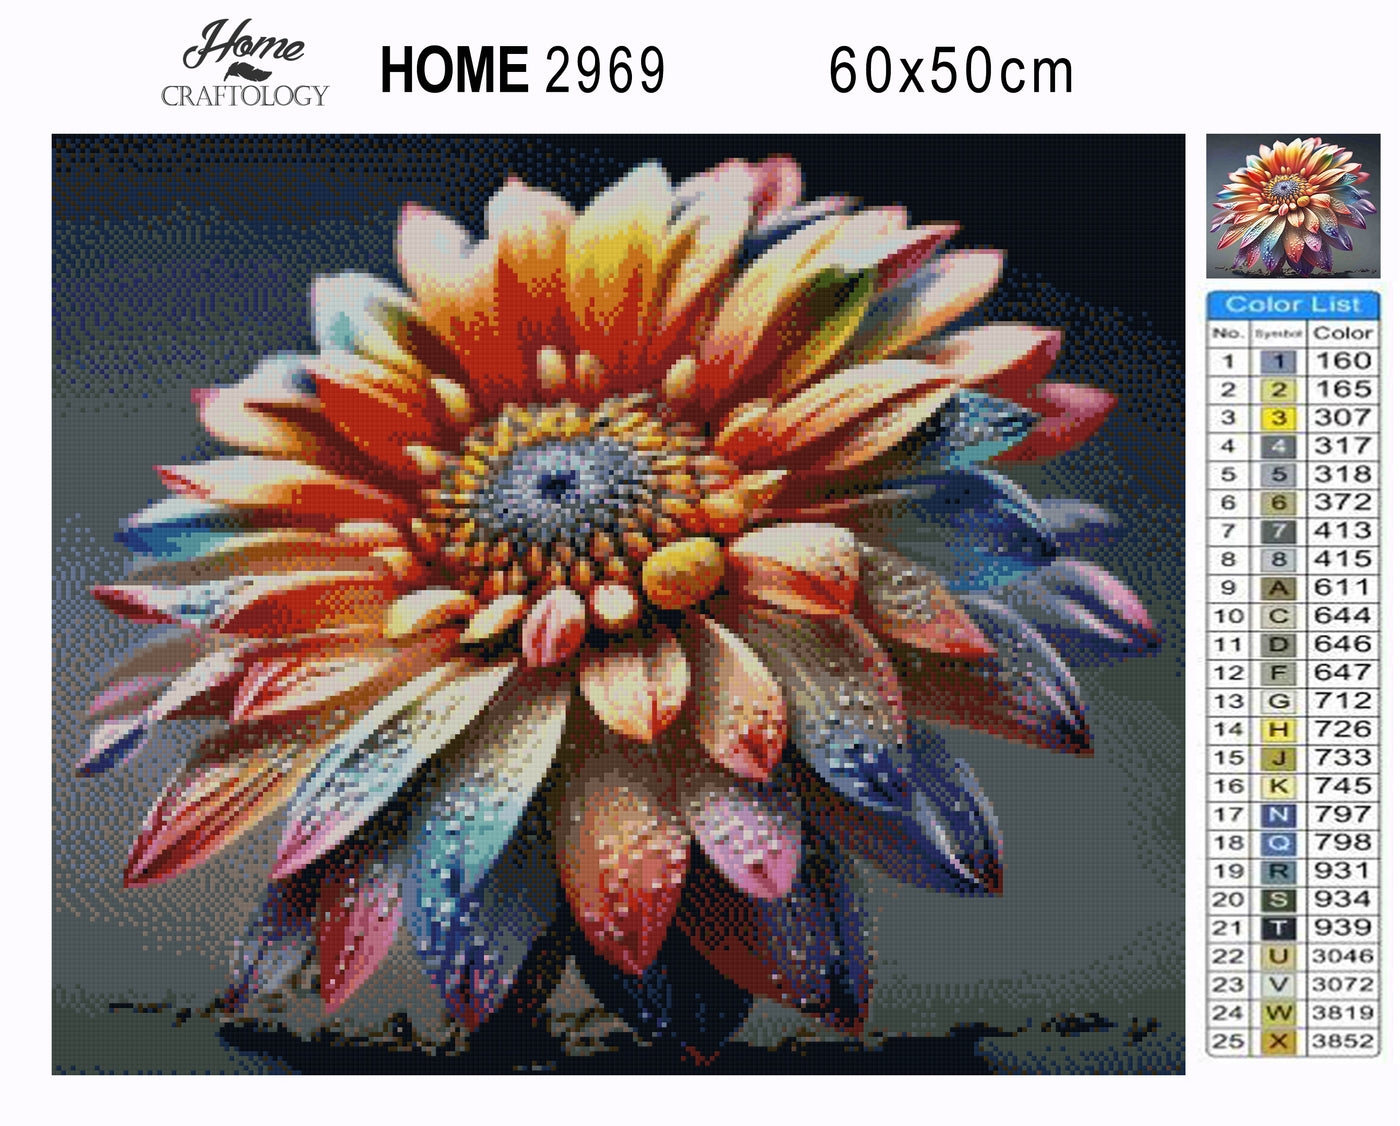 Colorful Flower with Droplets - Premium Diamond Painting Kit